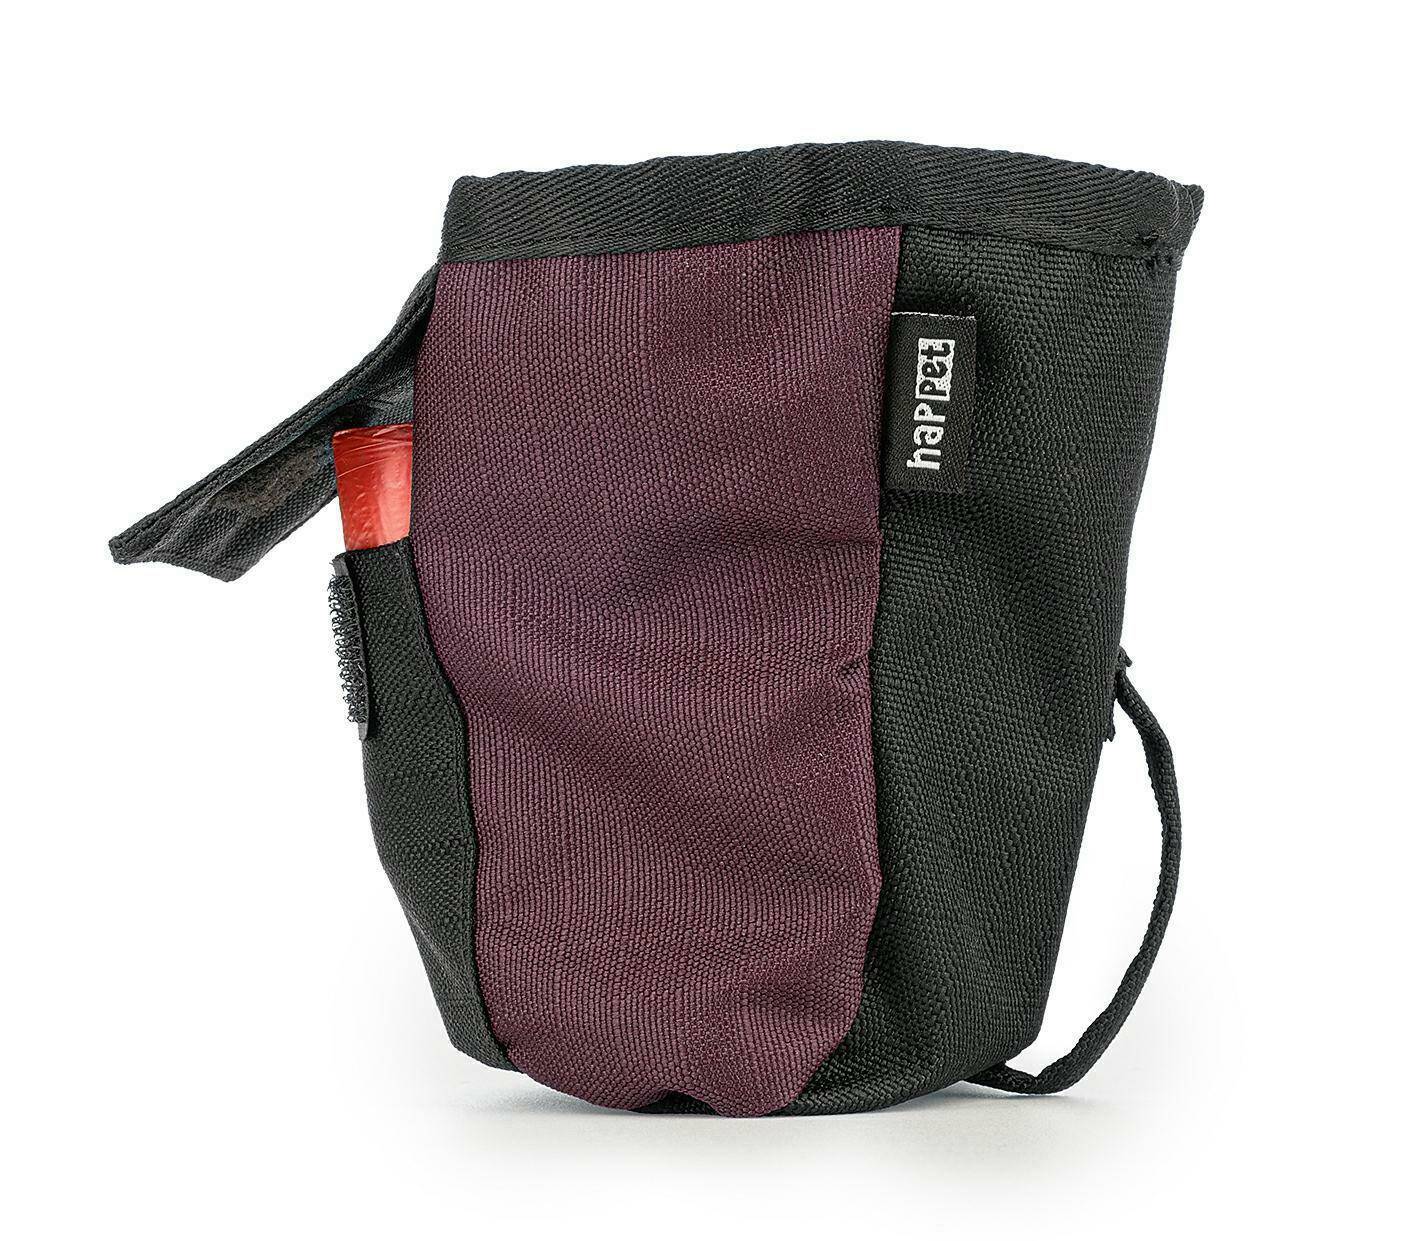 Multifunctional Pouch for Trash Bags, Treats, or a Water Bottle